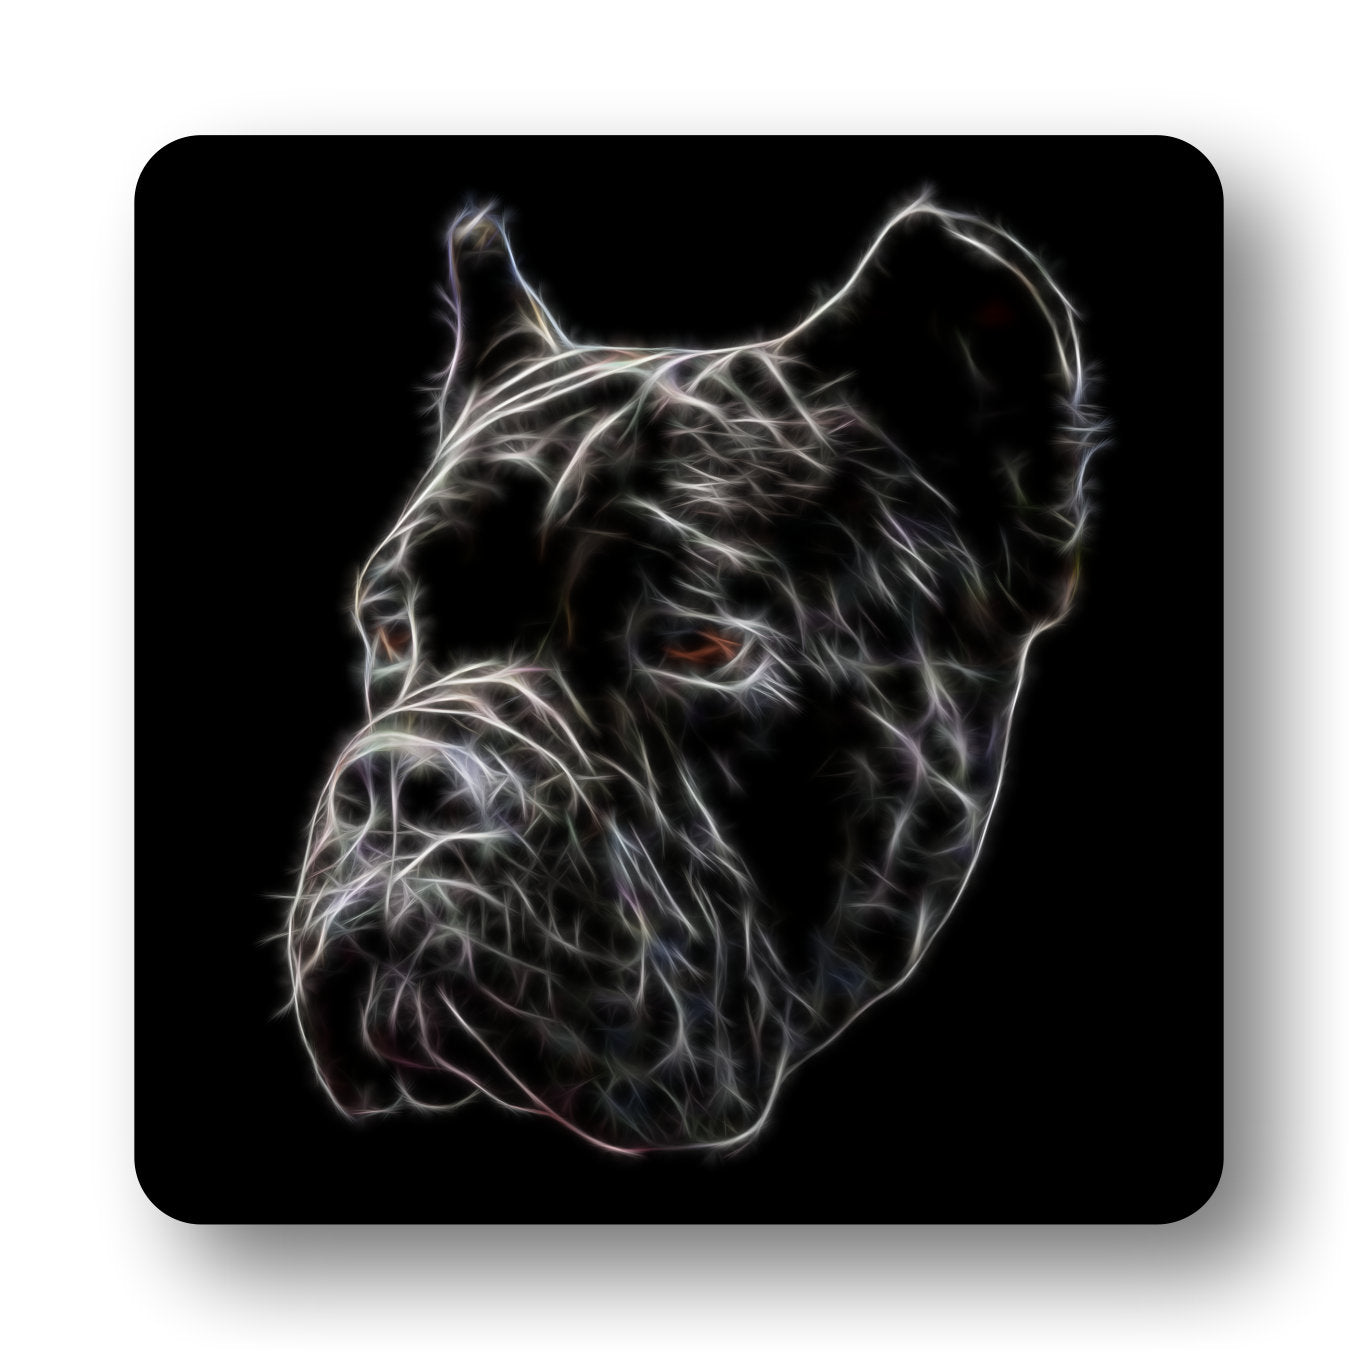 Cane Corso Metal Wall Plaque,  Perfect Cane Corso Owner Gift. Also available as Mouse Pad, Keychain, Bag or Coaster.